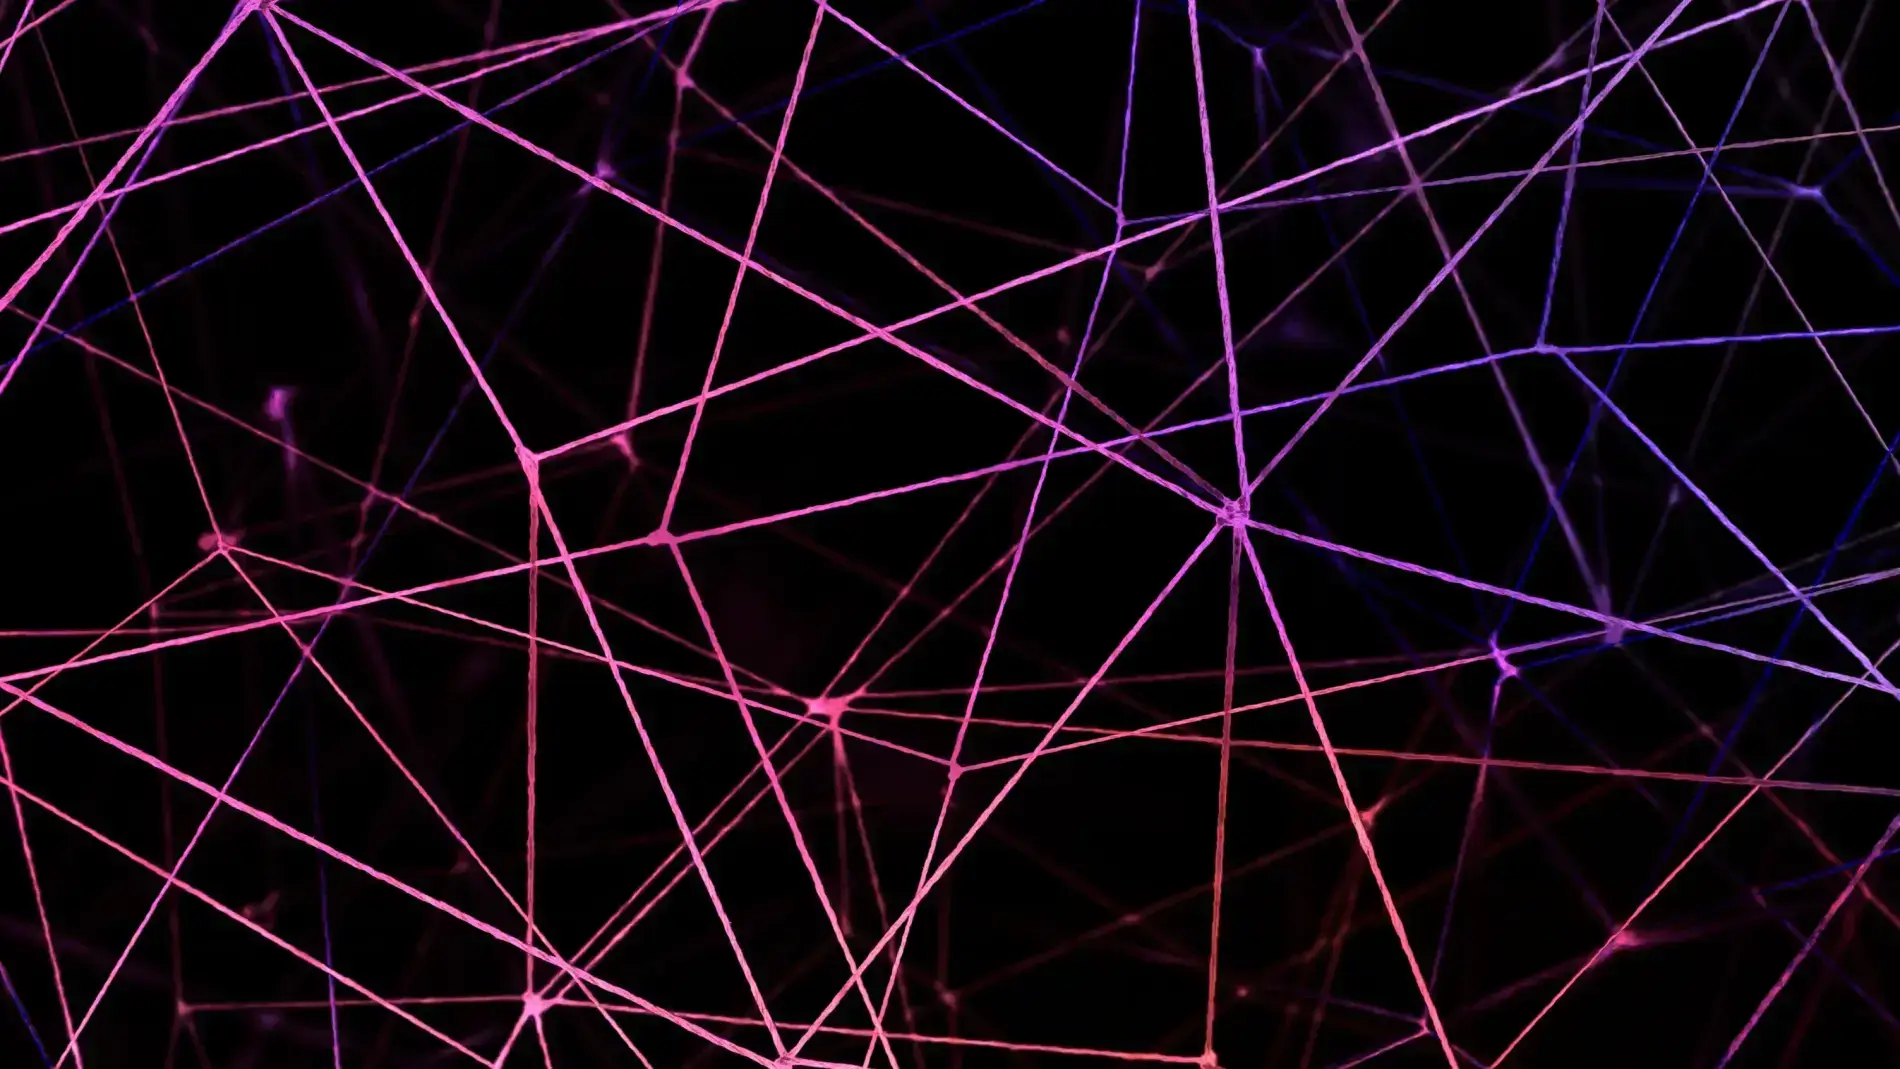 A series of pink-purple threads representing a decentralised system